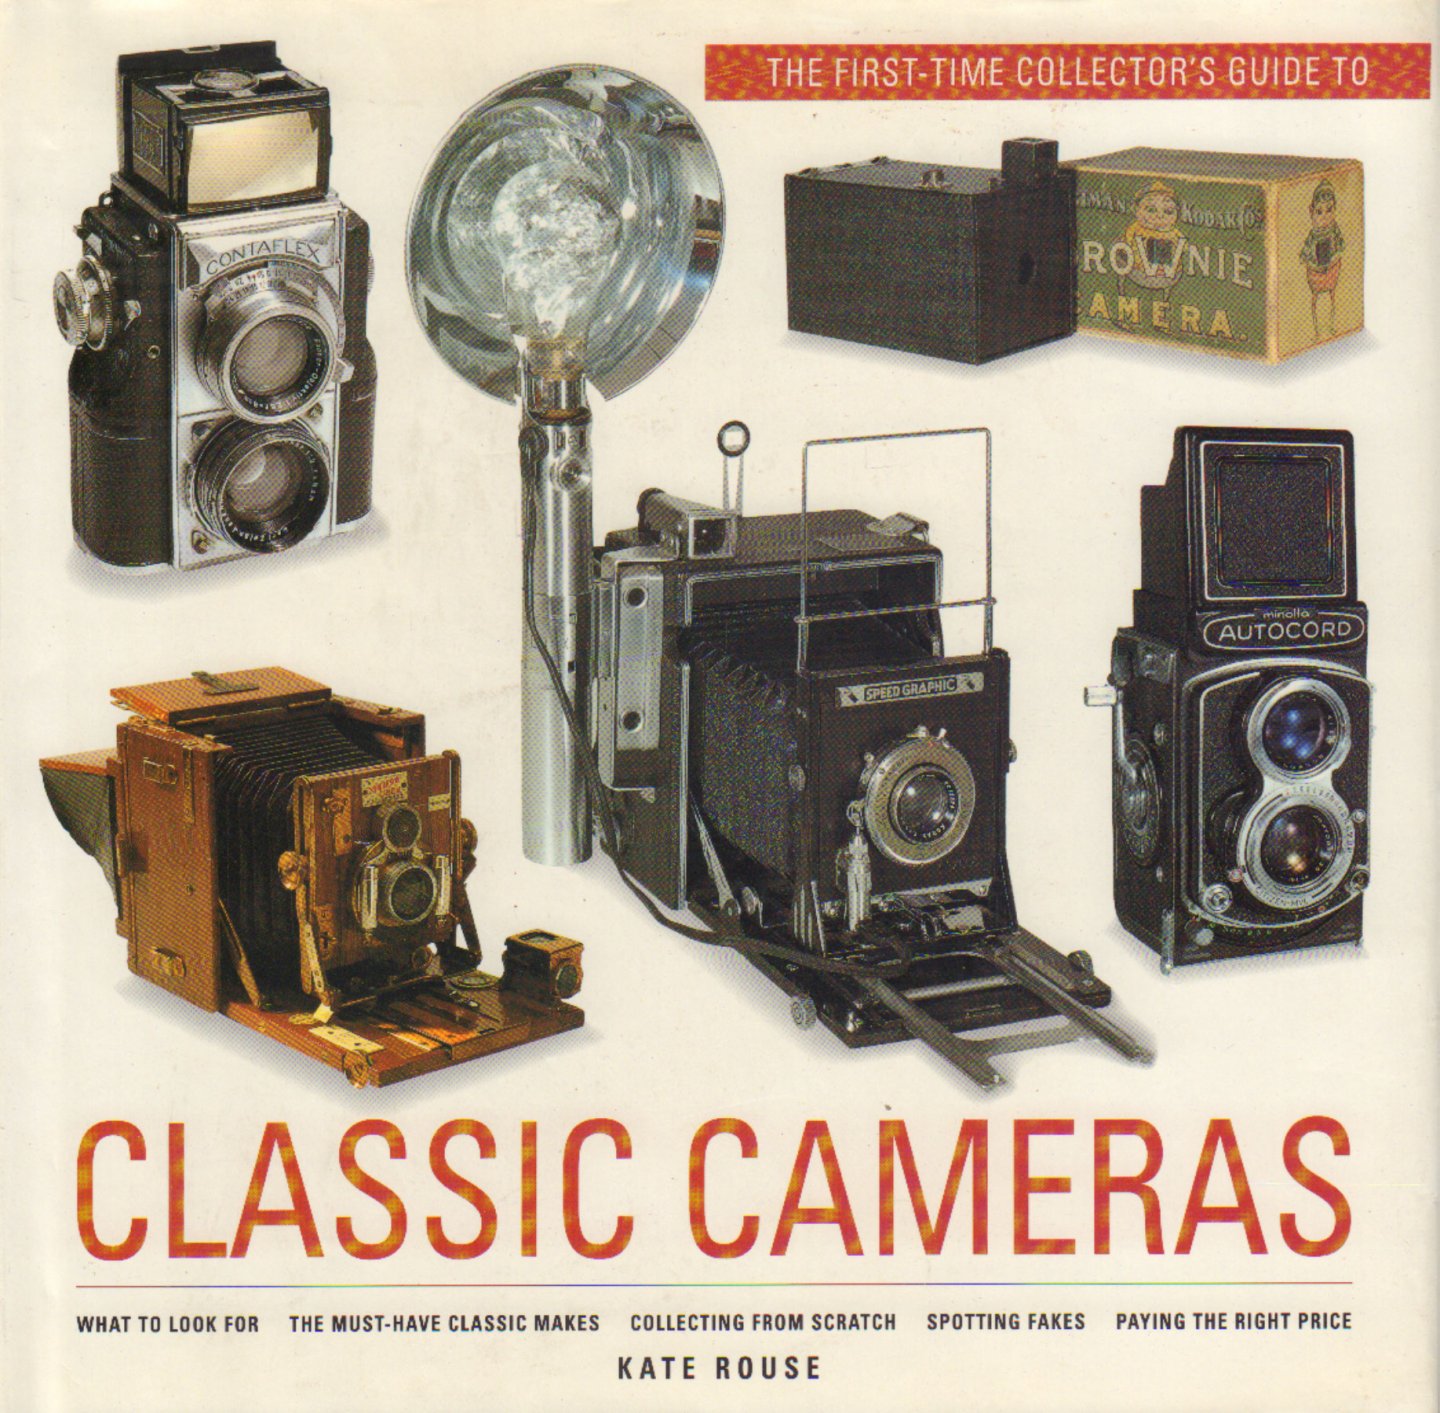 Rouse, Kate - The First-Time Collector's Guide To Classic Camera's, 64 pag. hardcover + stofomslag, zeer goede staat